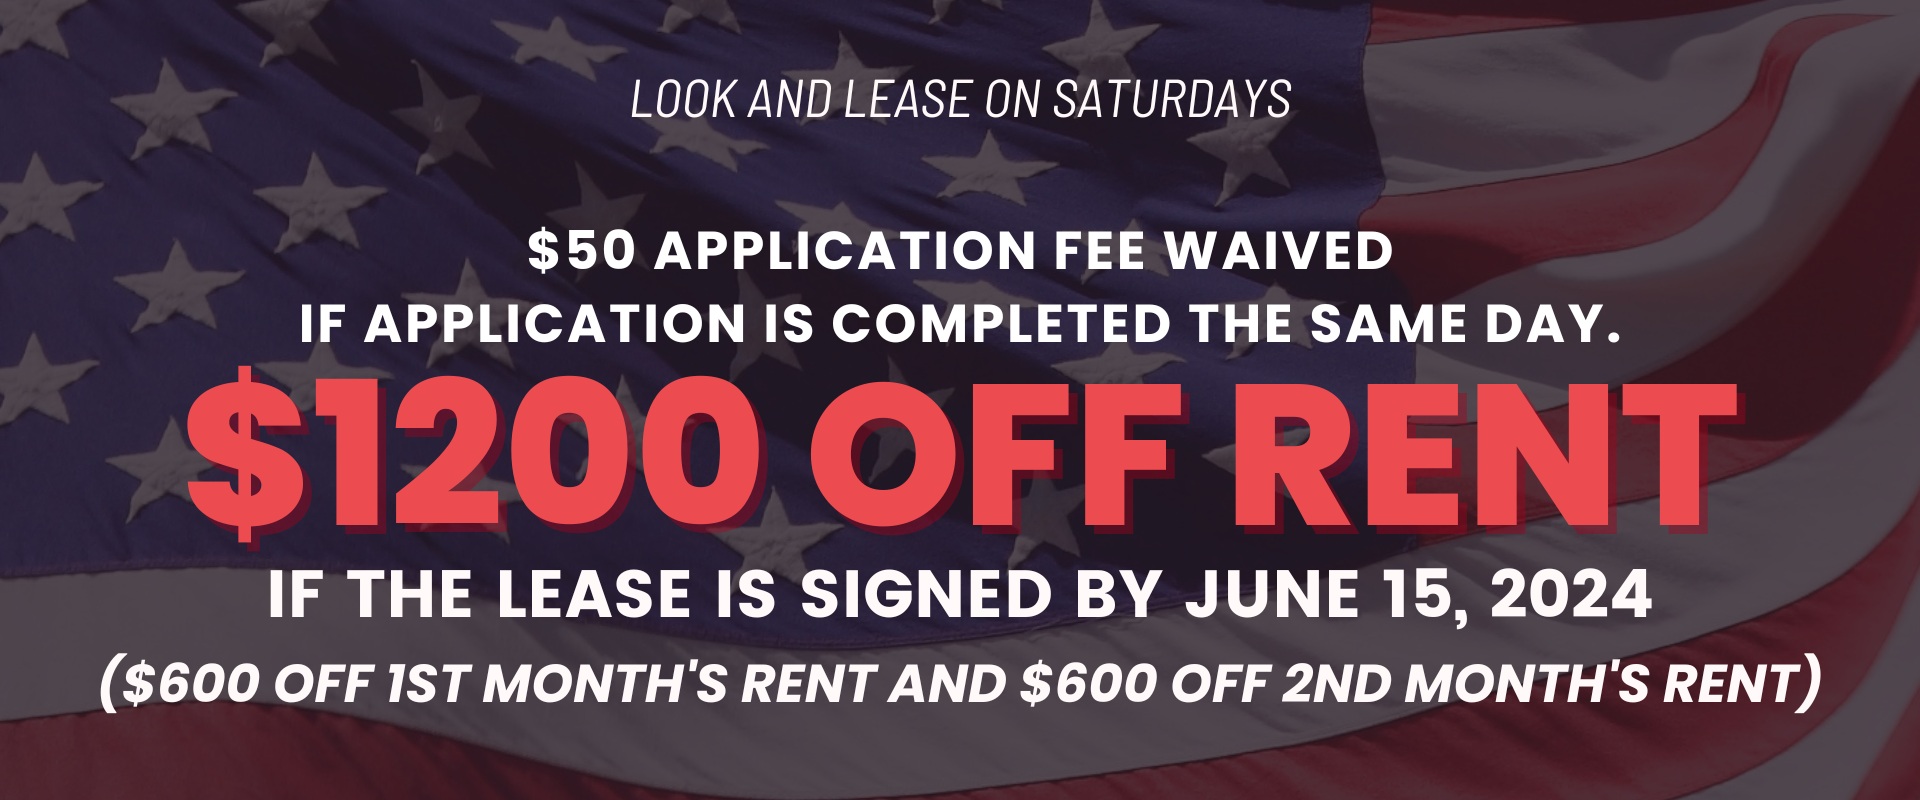 Look and Lease on Saturdays $50 application fee waived if application is completed the same day. $1200 off rent if the Lease is signed by June 15, 2024 ($600 off 1st month's rent and $600 off 2nd month's rent)